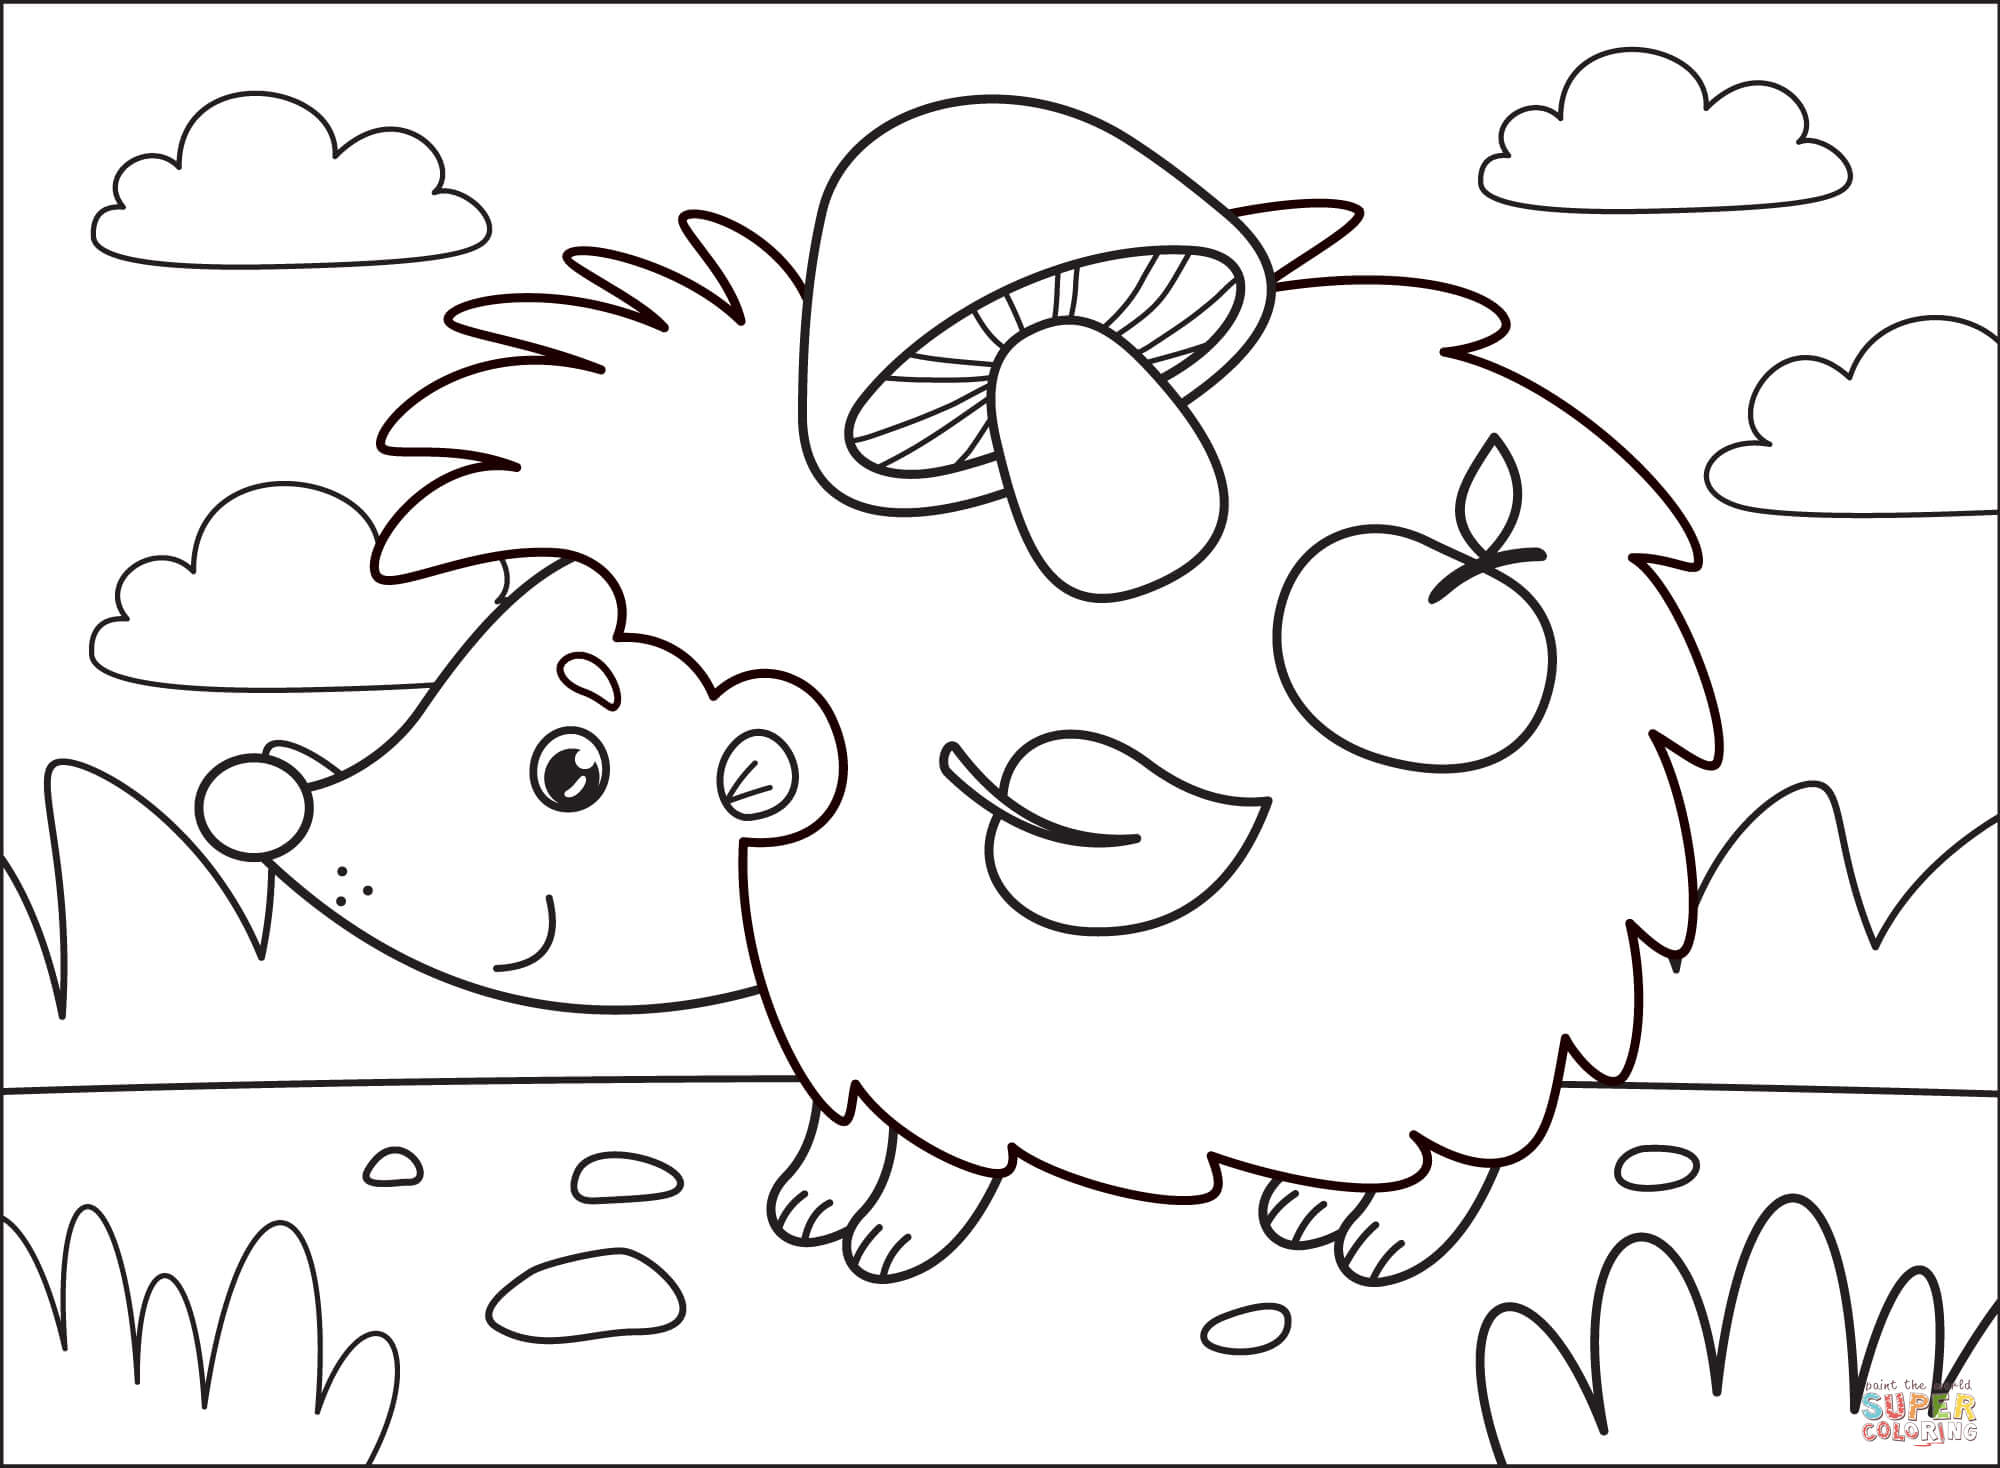 Hedgehog coloring page free printable coloring pages